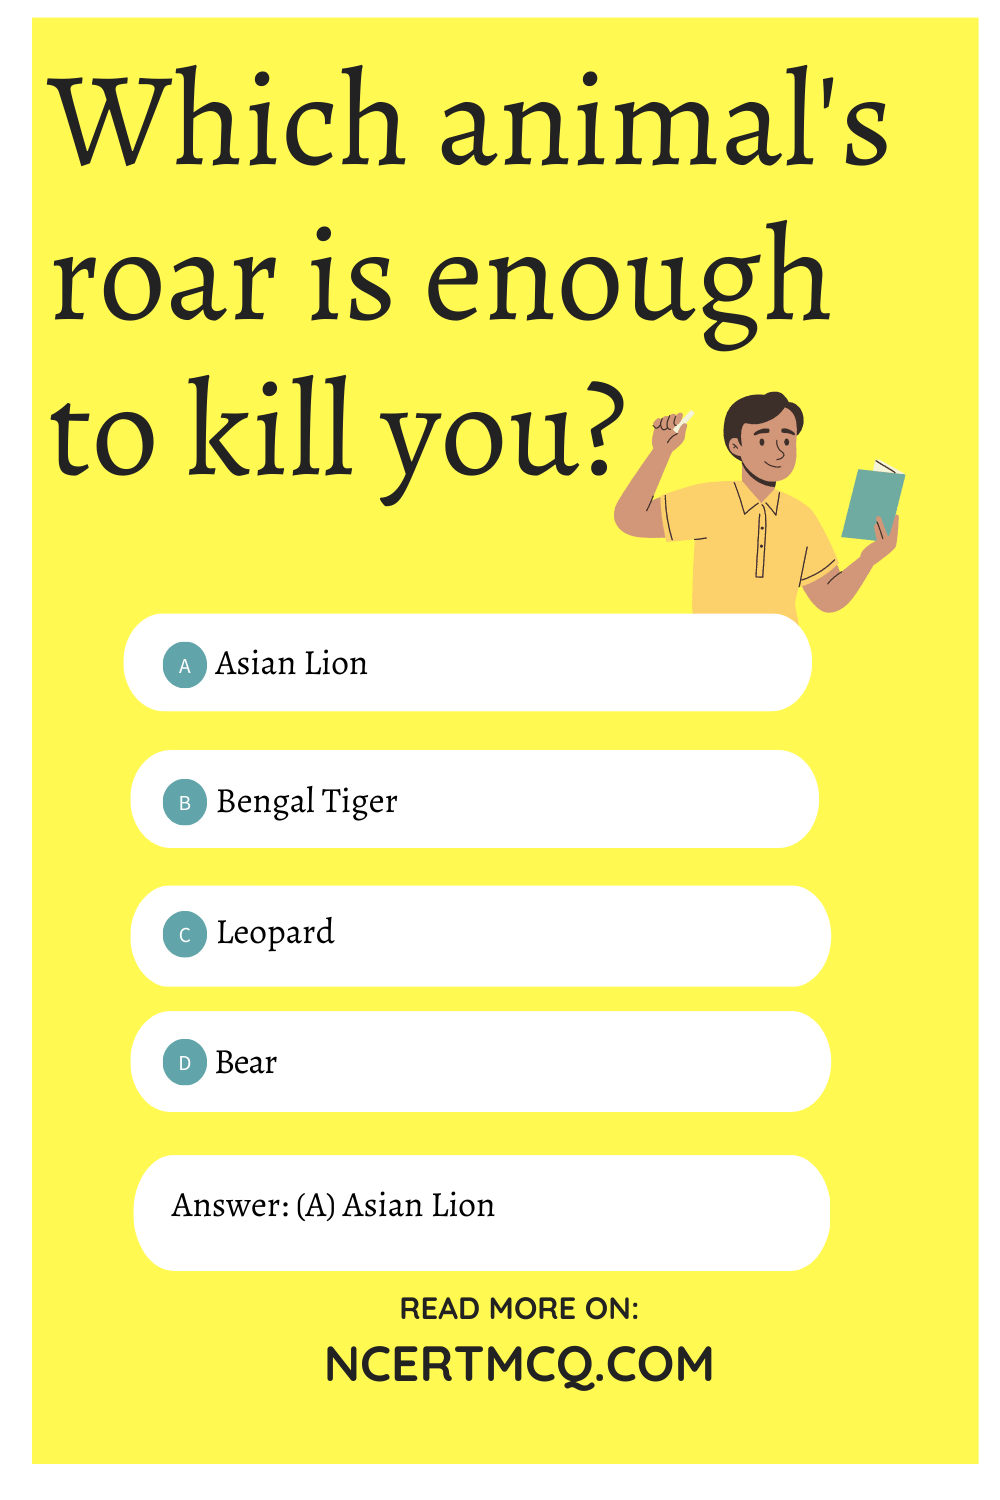 Which animal's roar is enough to kill you?